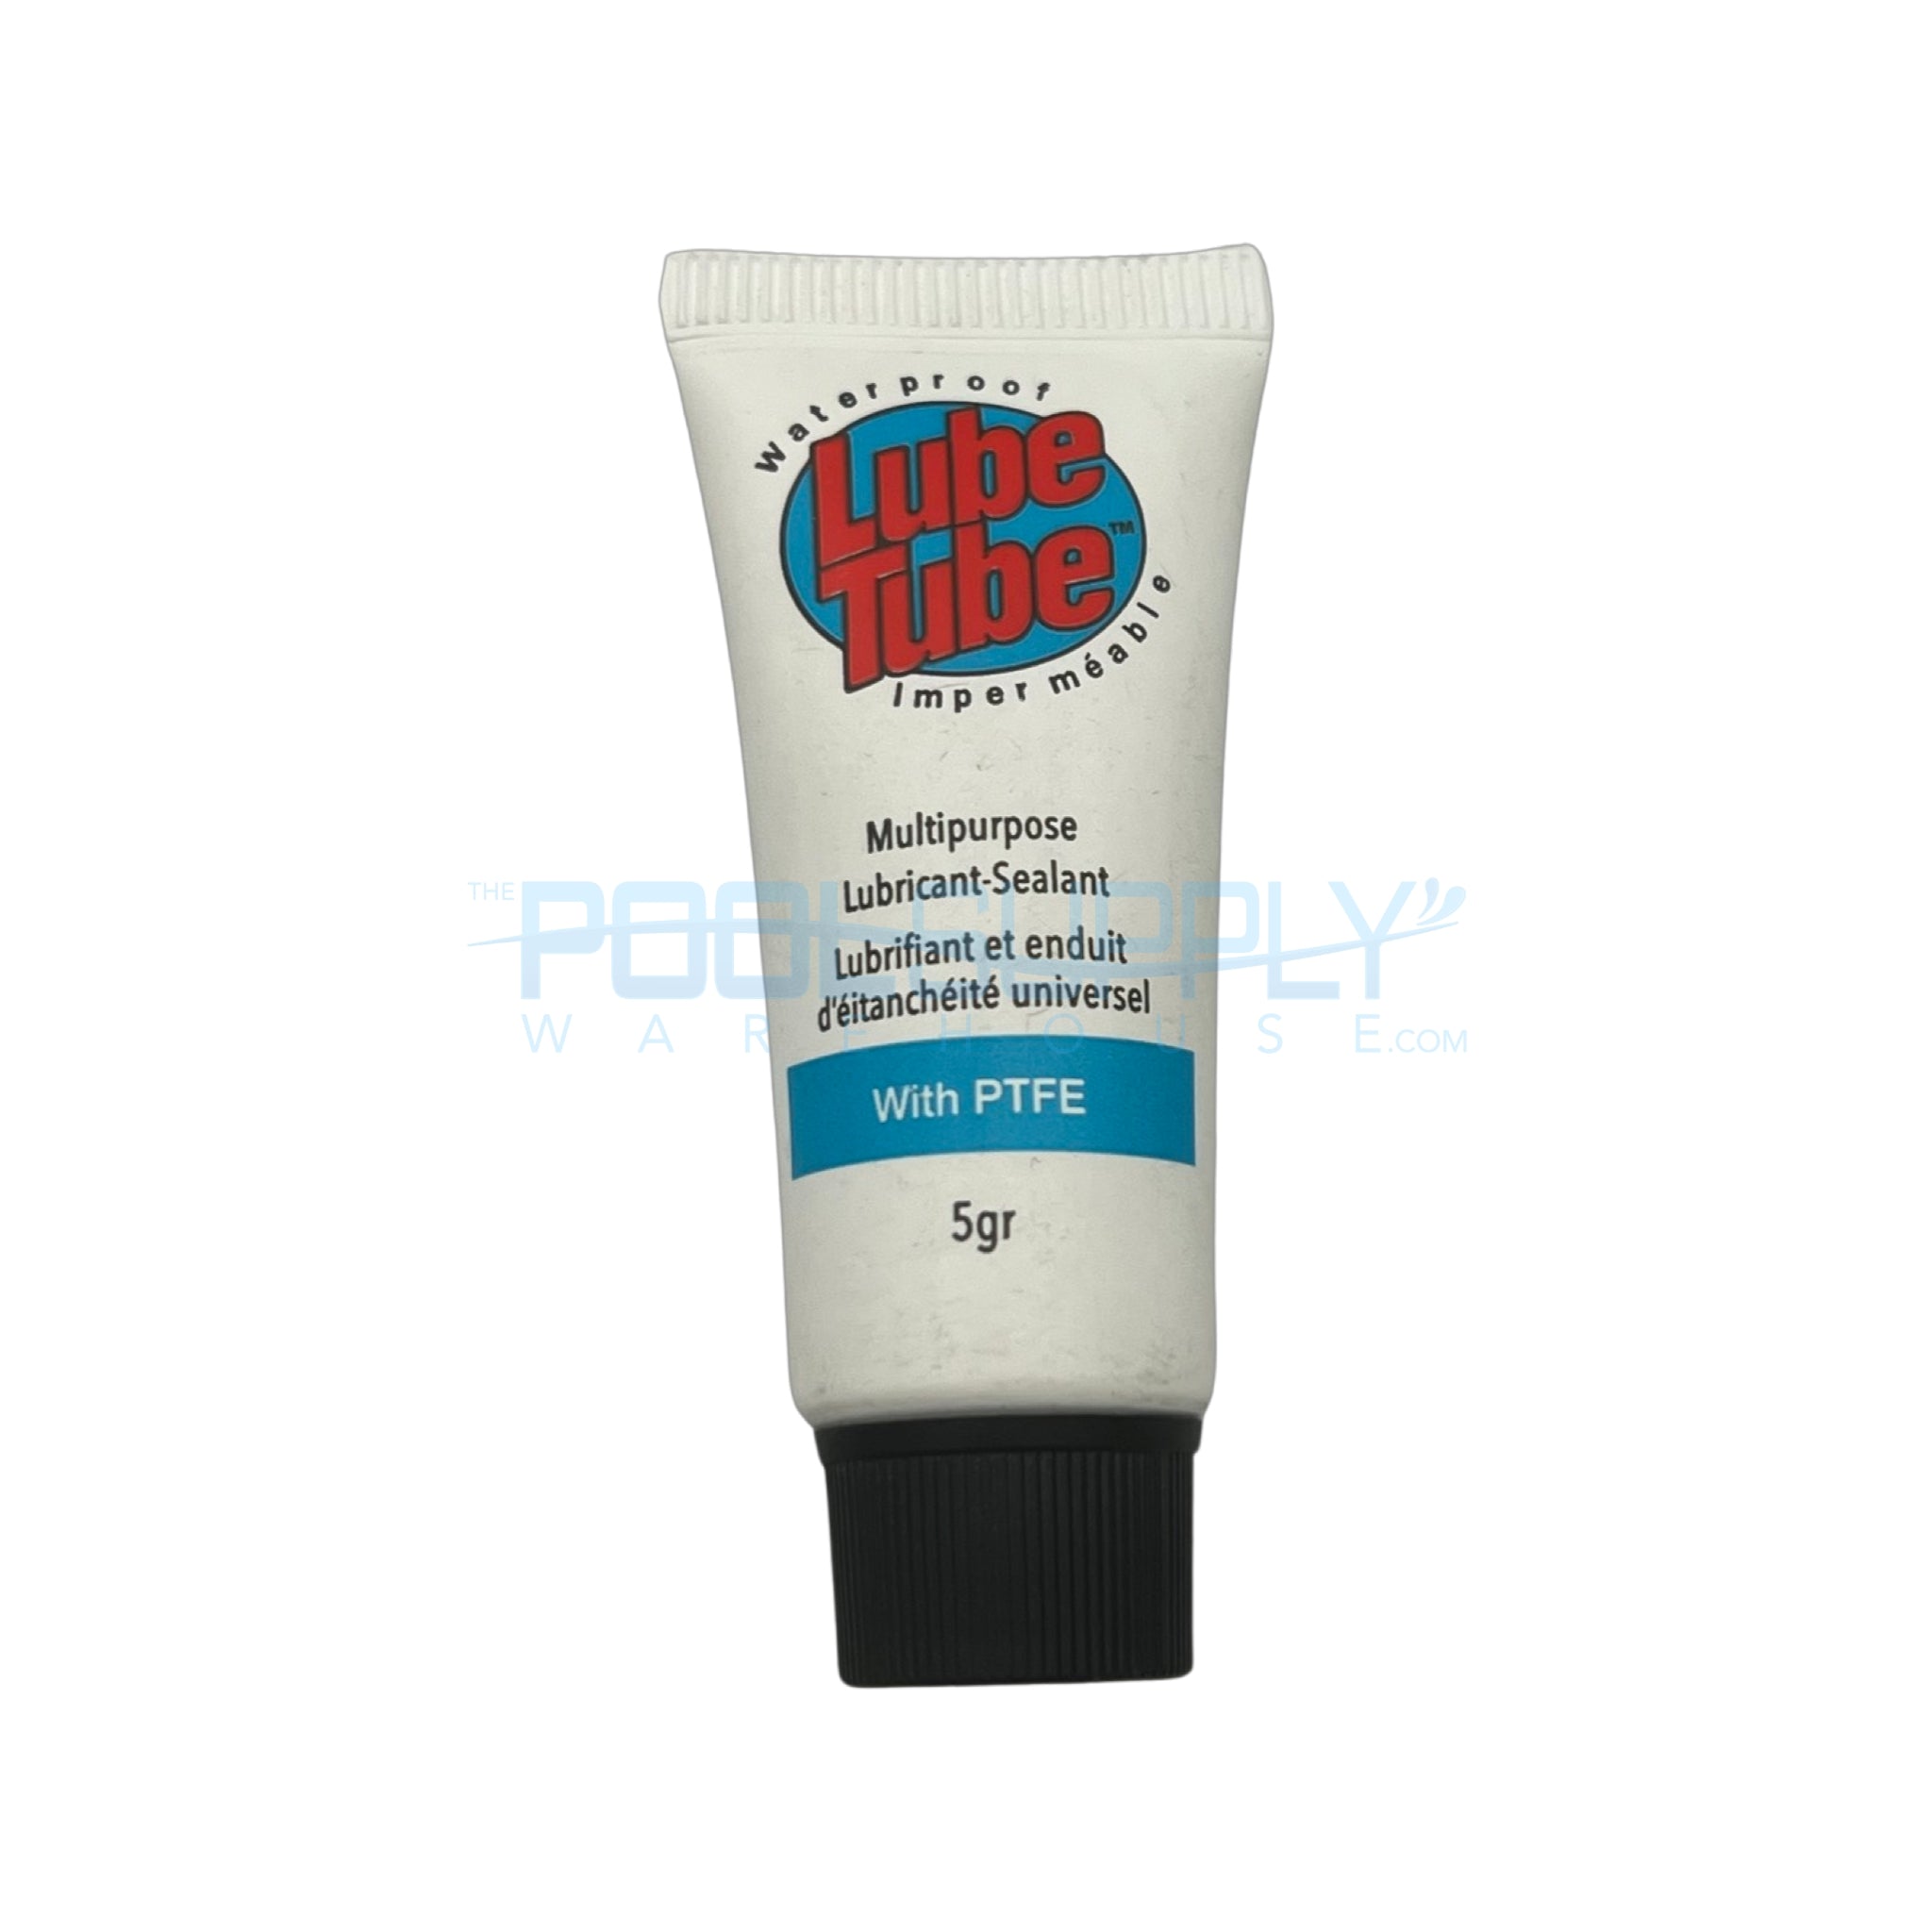 O-ring Lube - Grease, Oil, and Silicone Lubricants